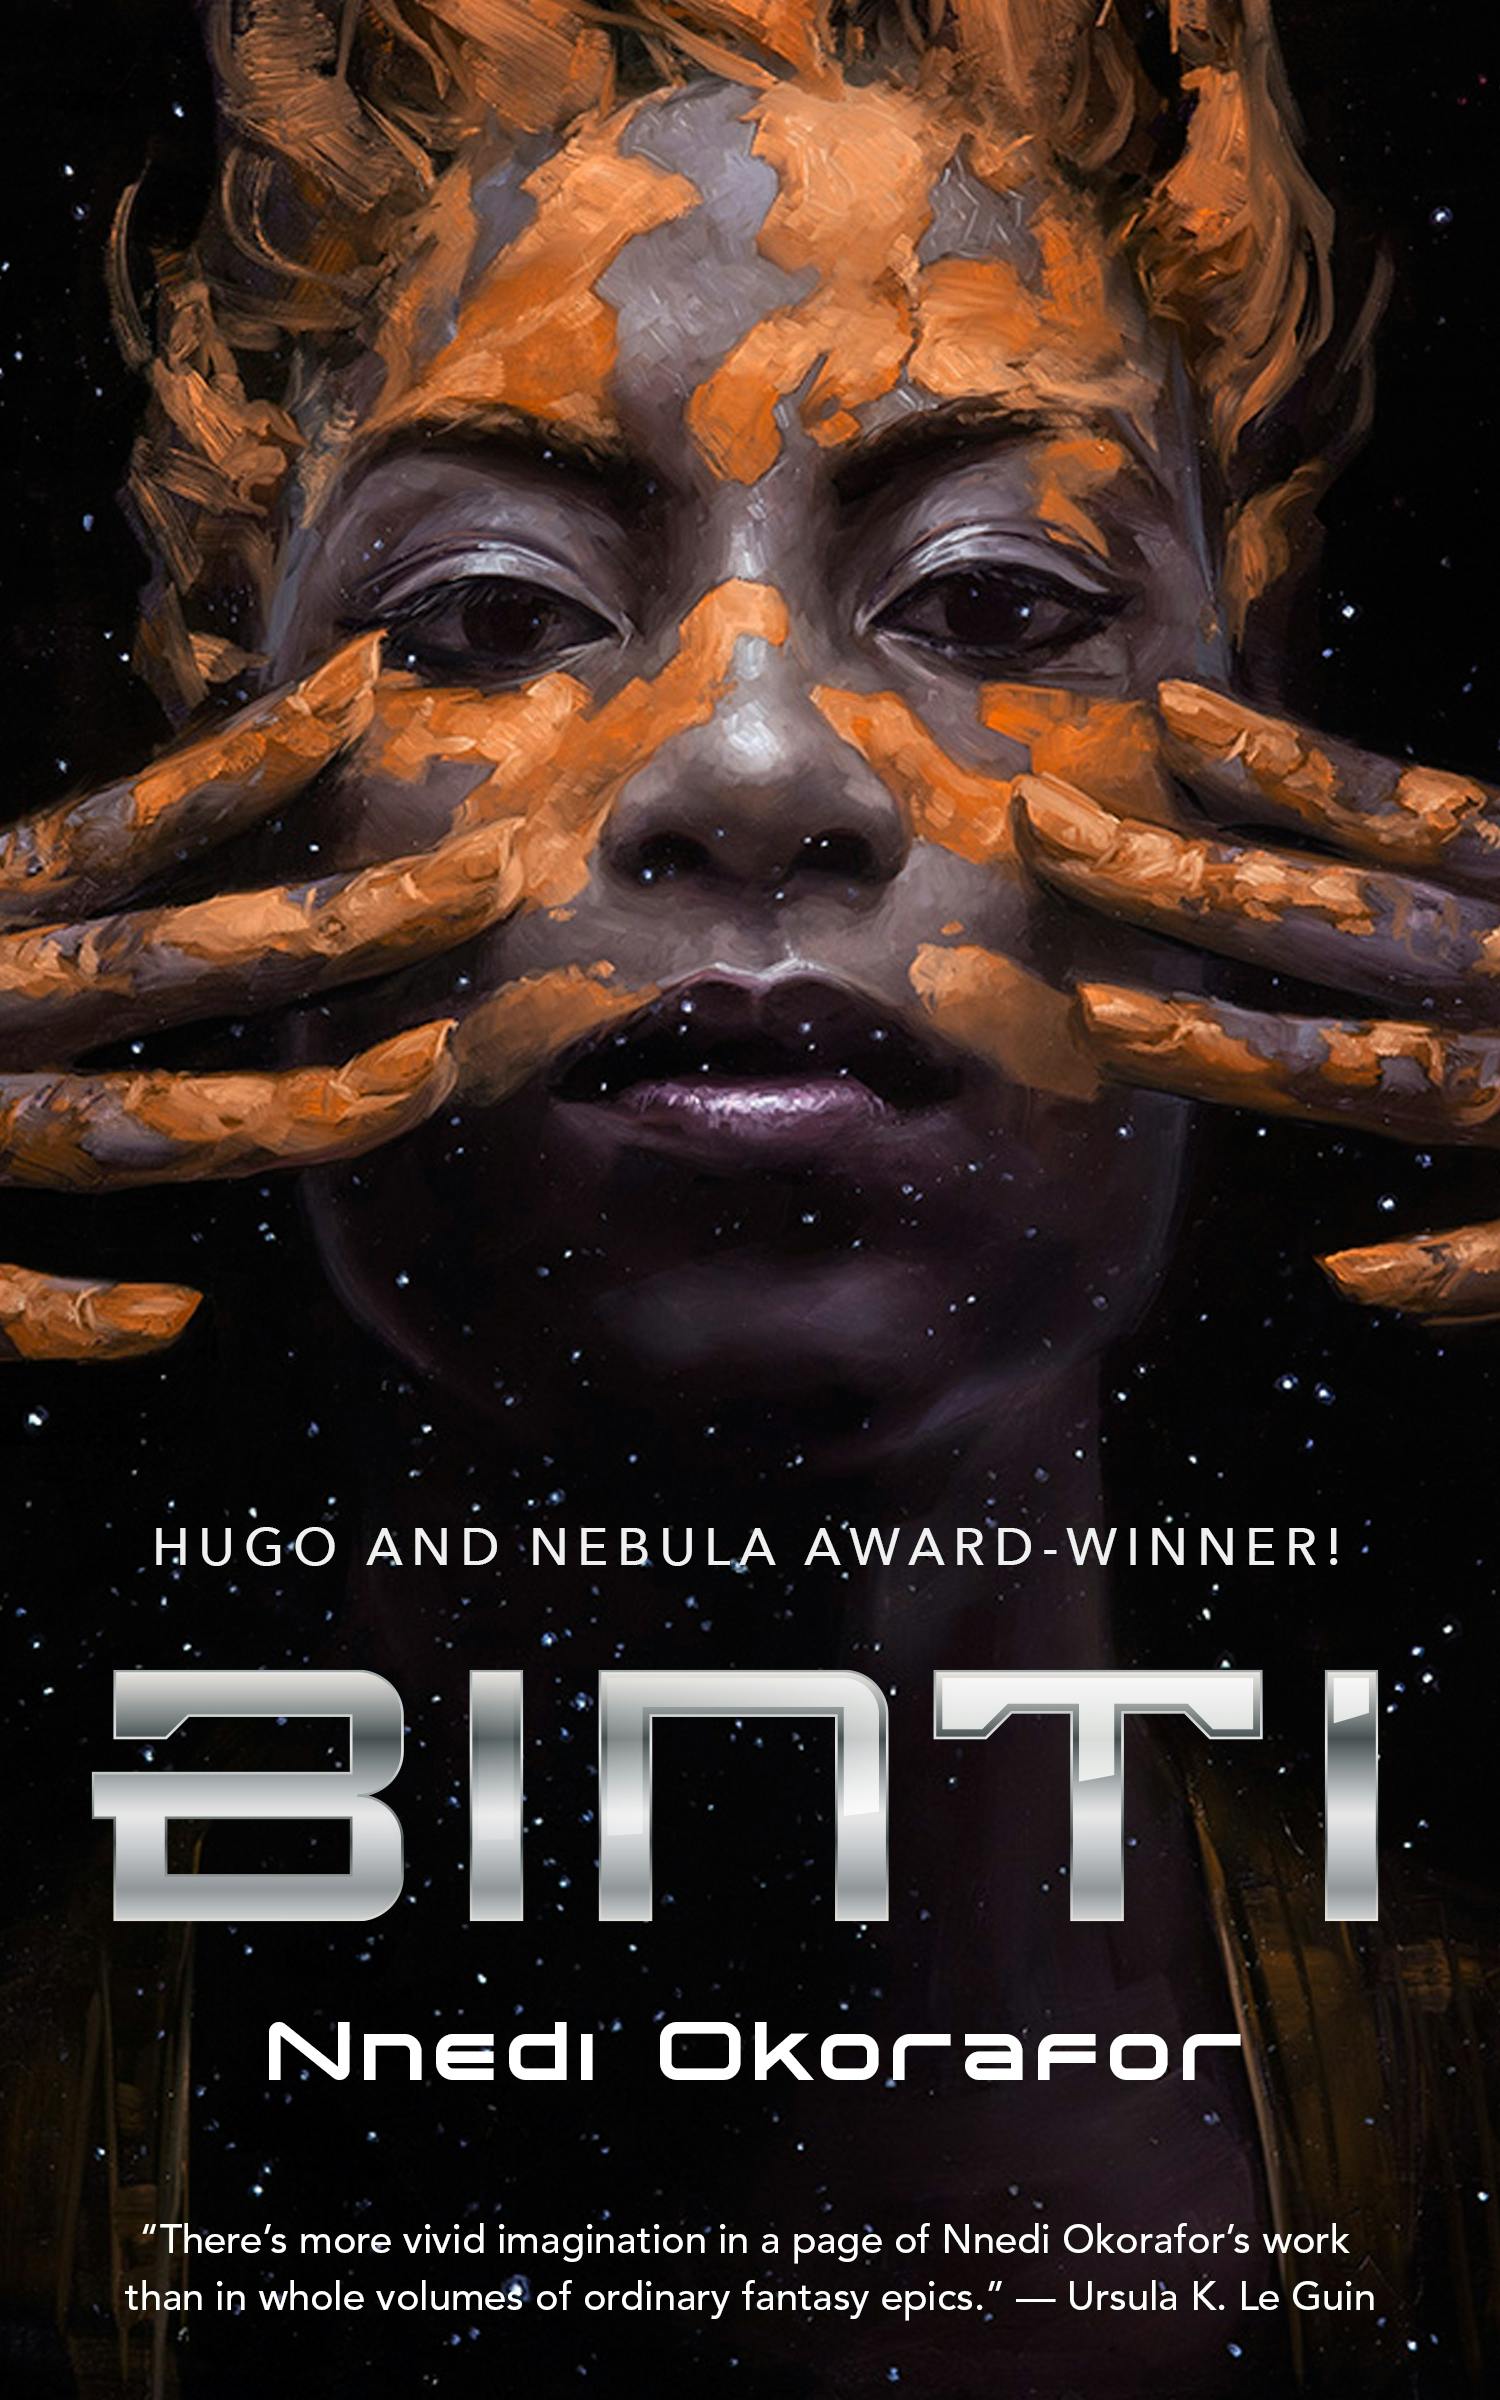 Cover for the book titled as: Binti